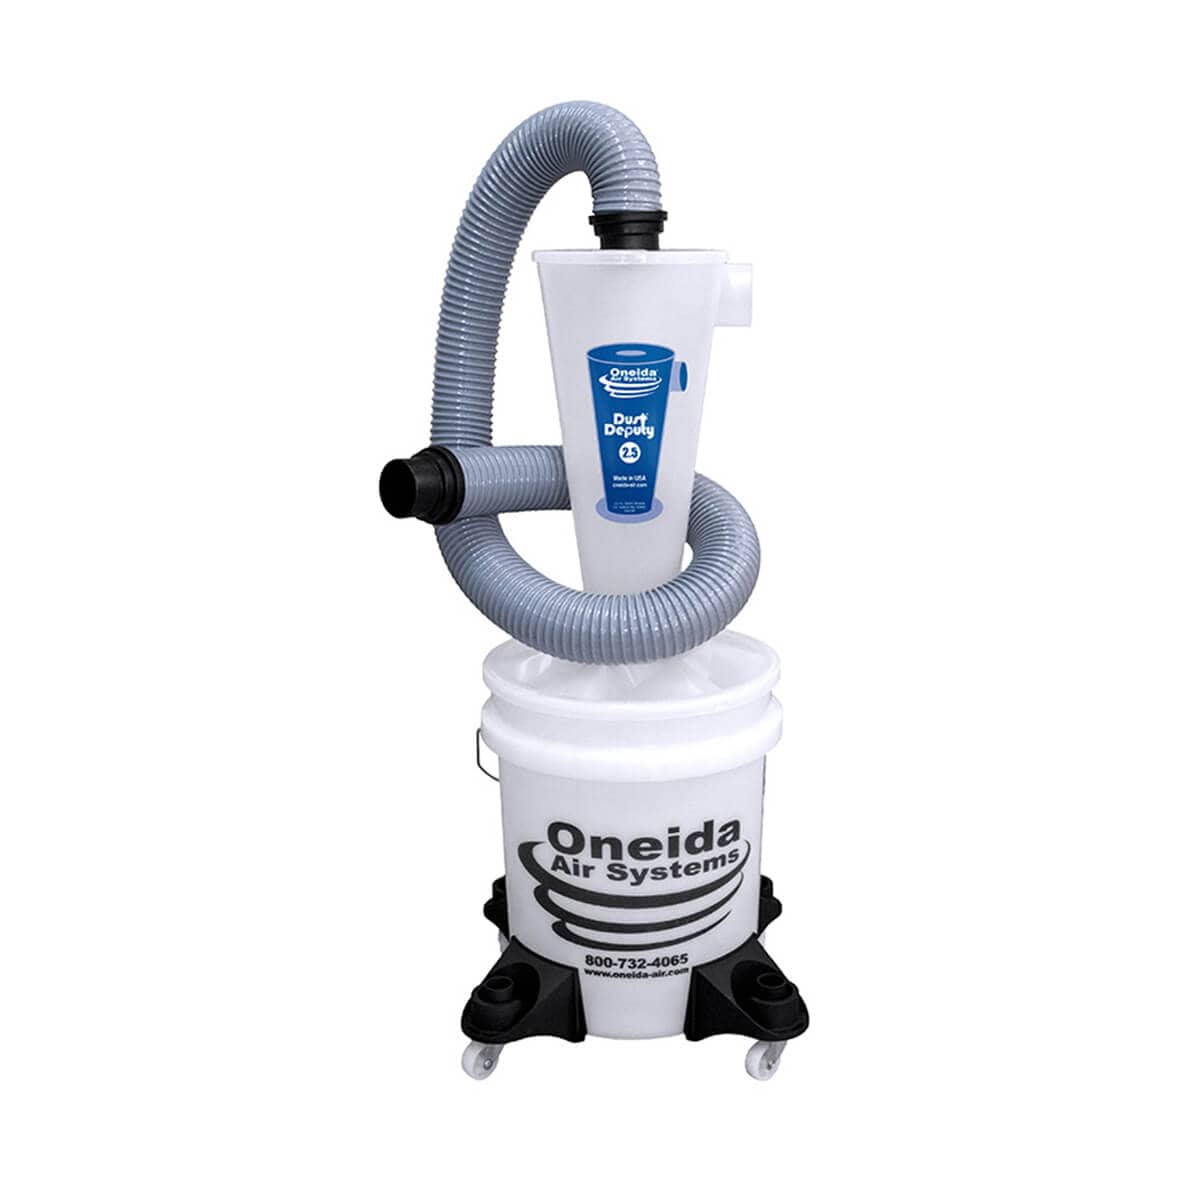 Oneida Air AXD250004 Dust Collection Dust Deputy 2.5 Deluxe Cyclone Separator Kit